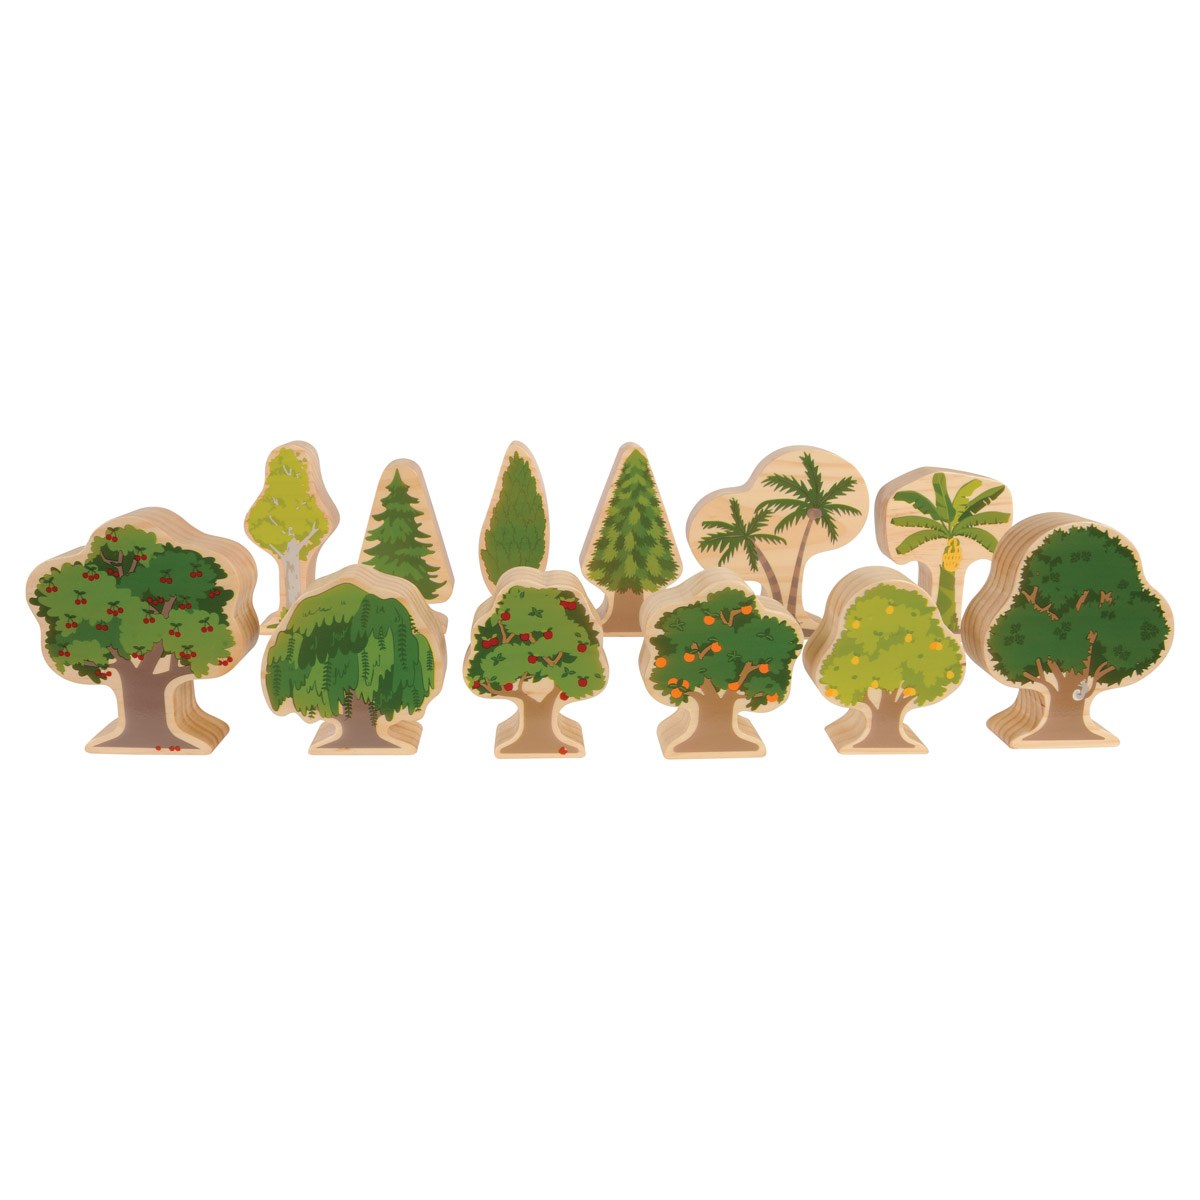 Kaplan Early Learning Company Four Seasons Wood Trees - Double-Sided